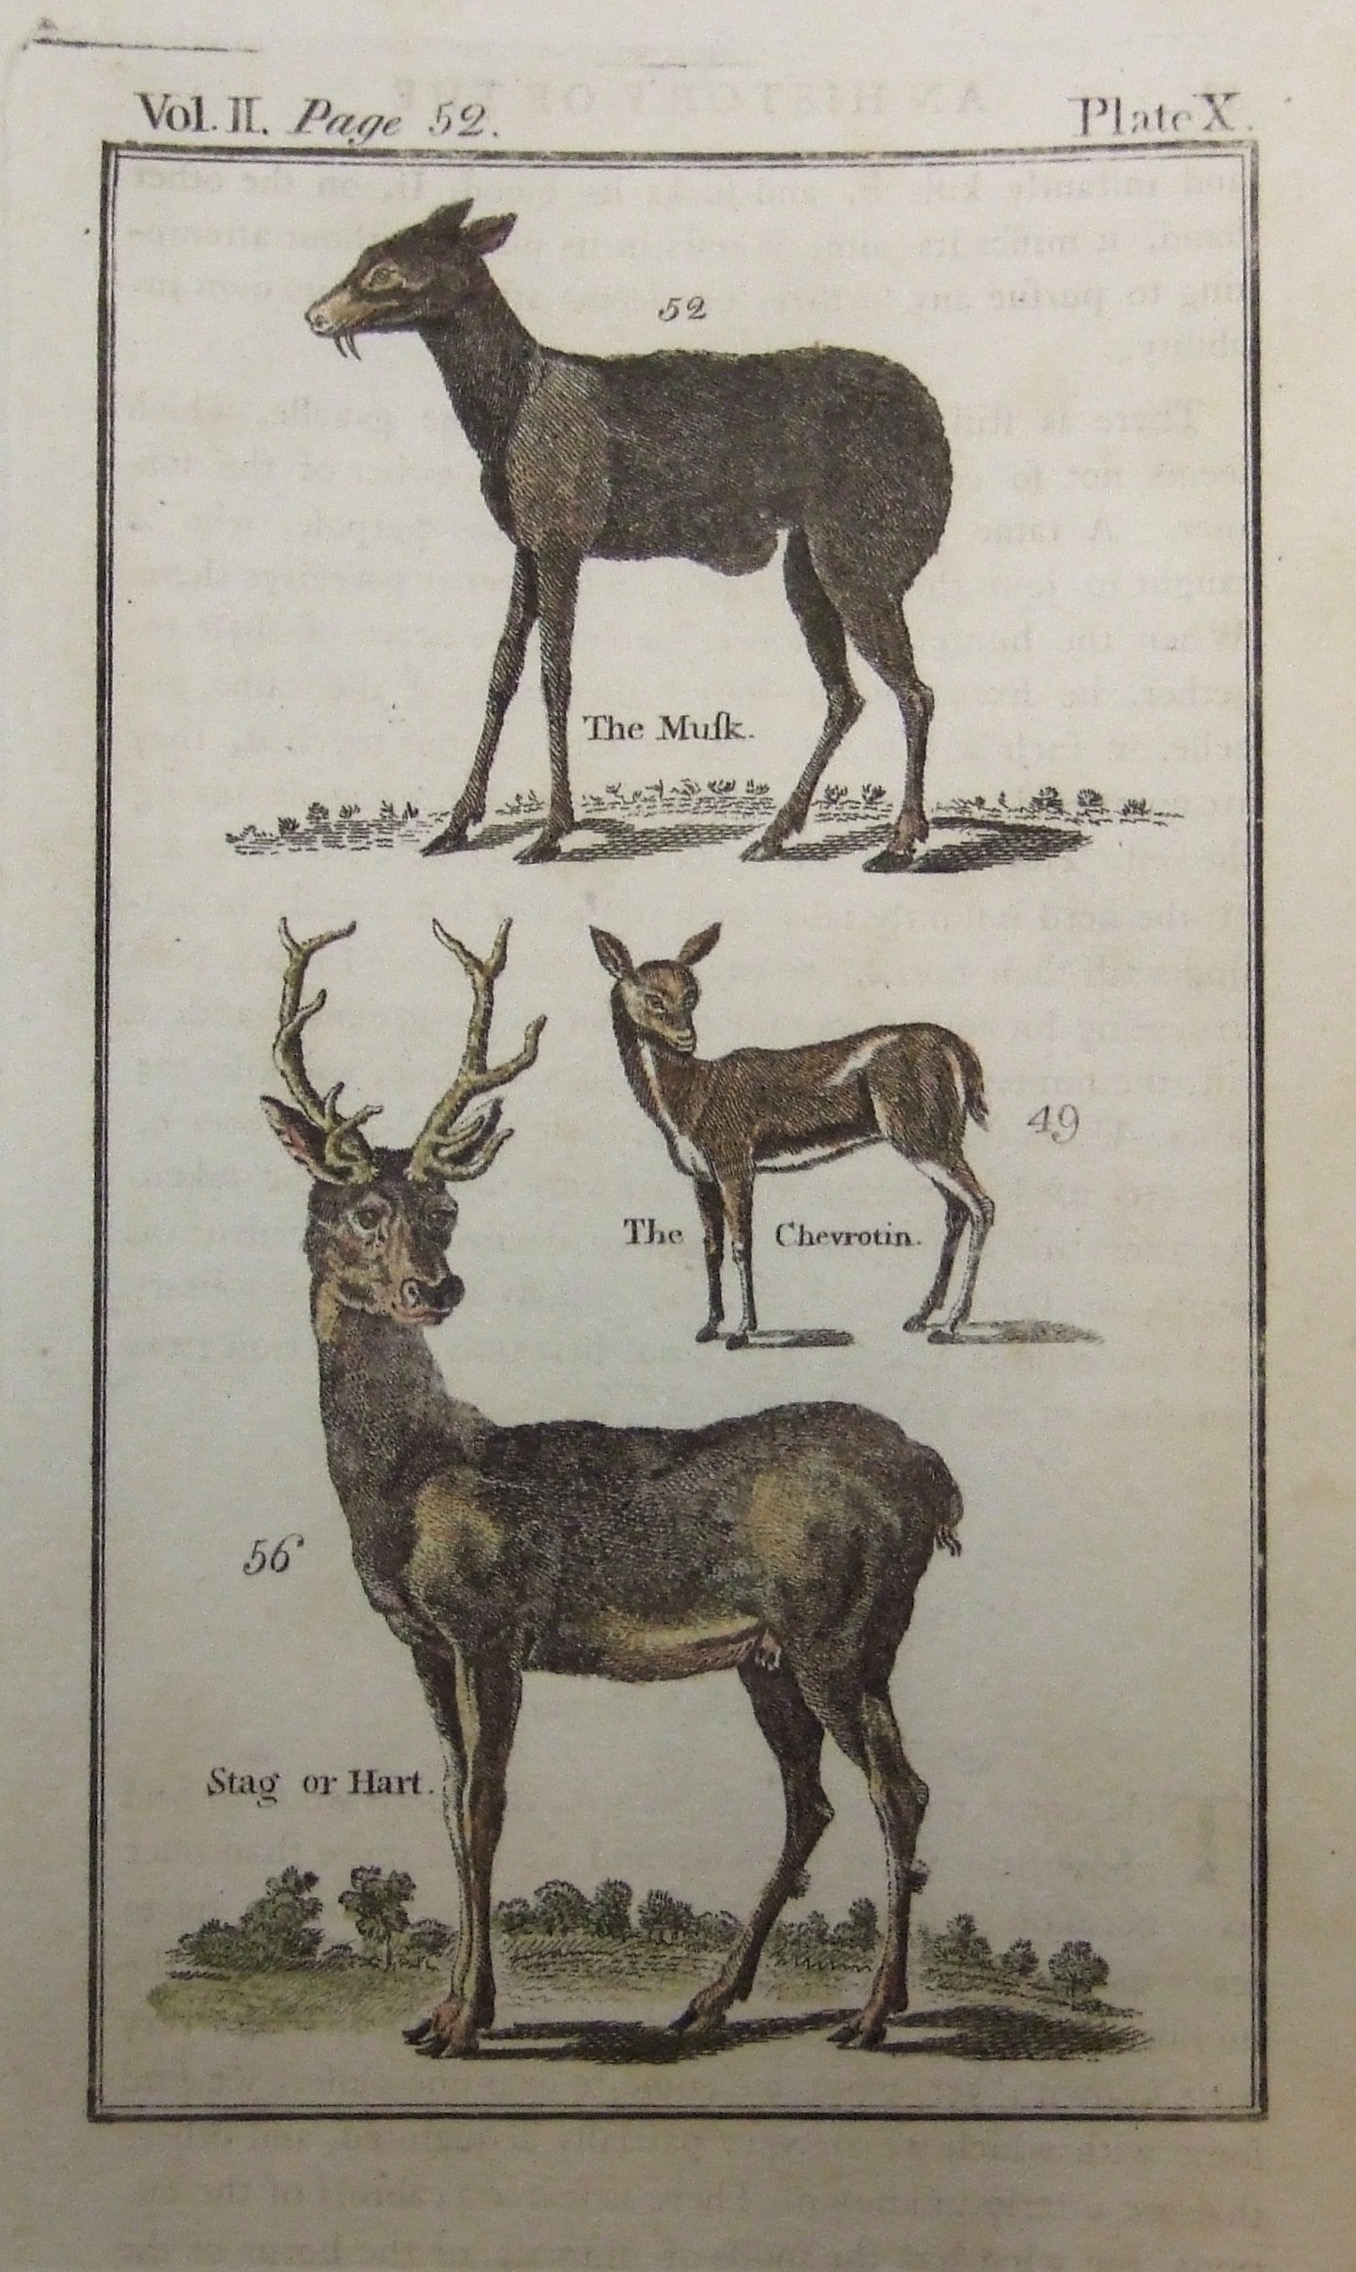 The Musk, The Chevrotin, Stag or Hart